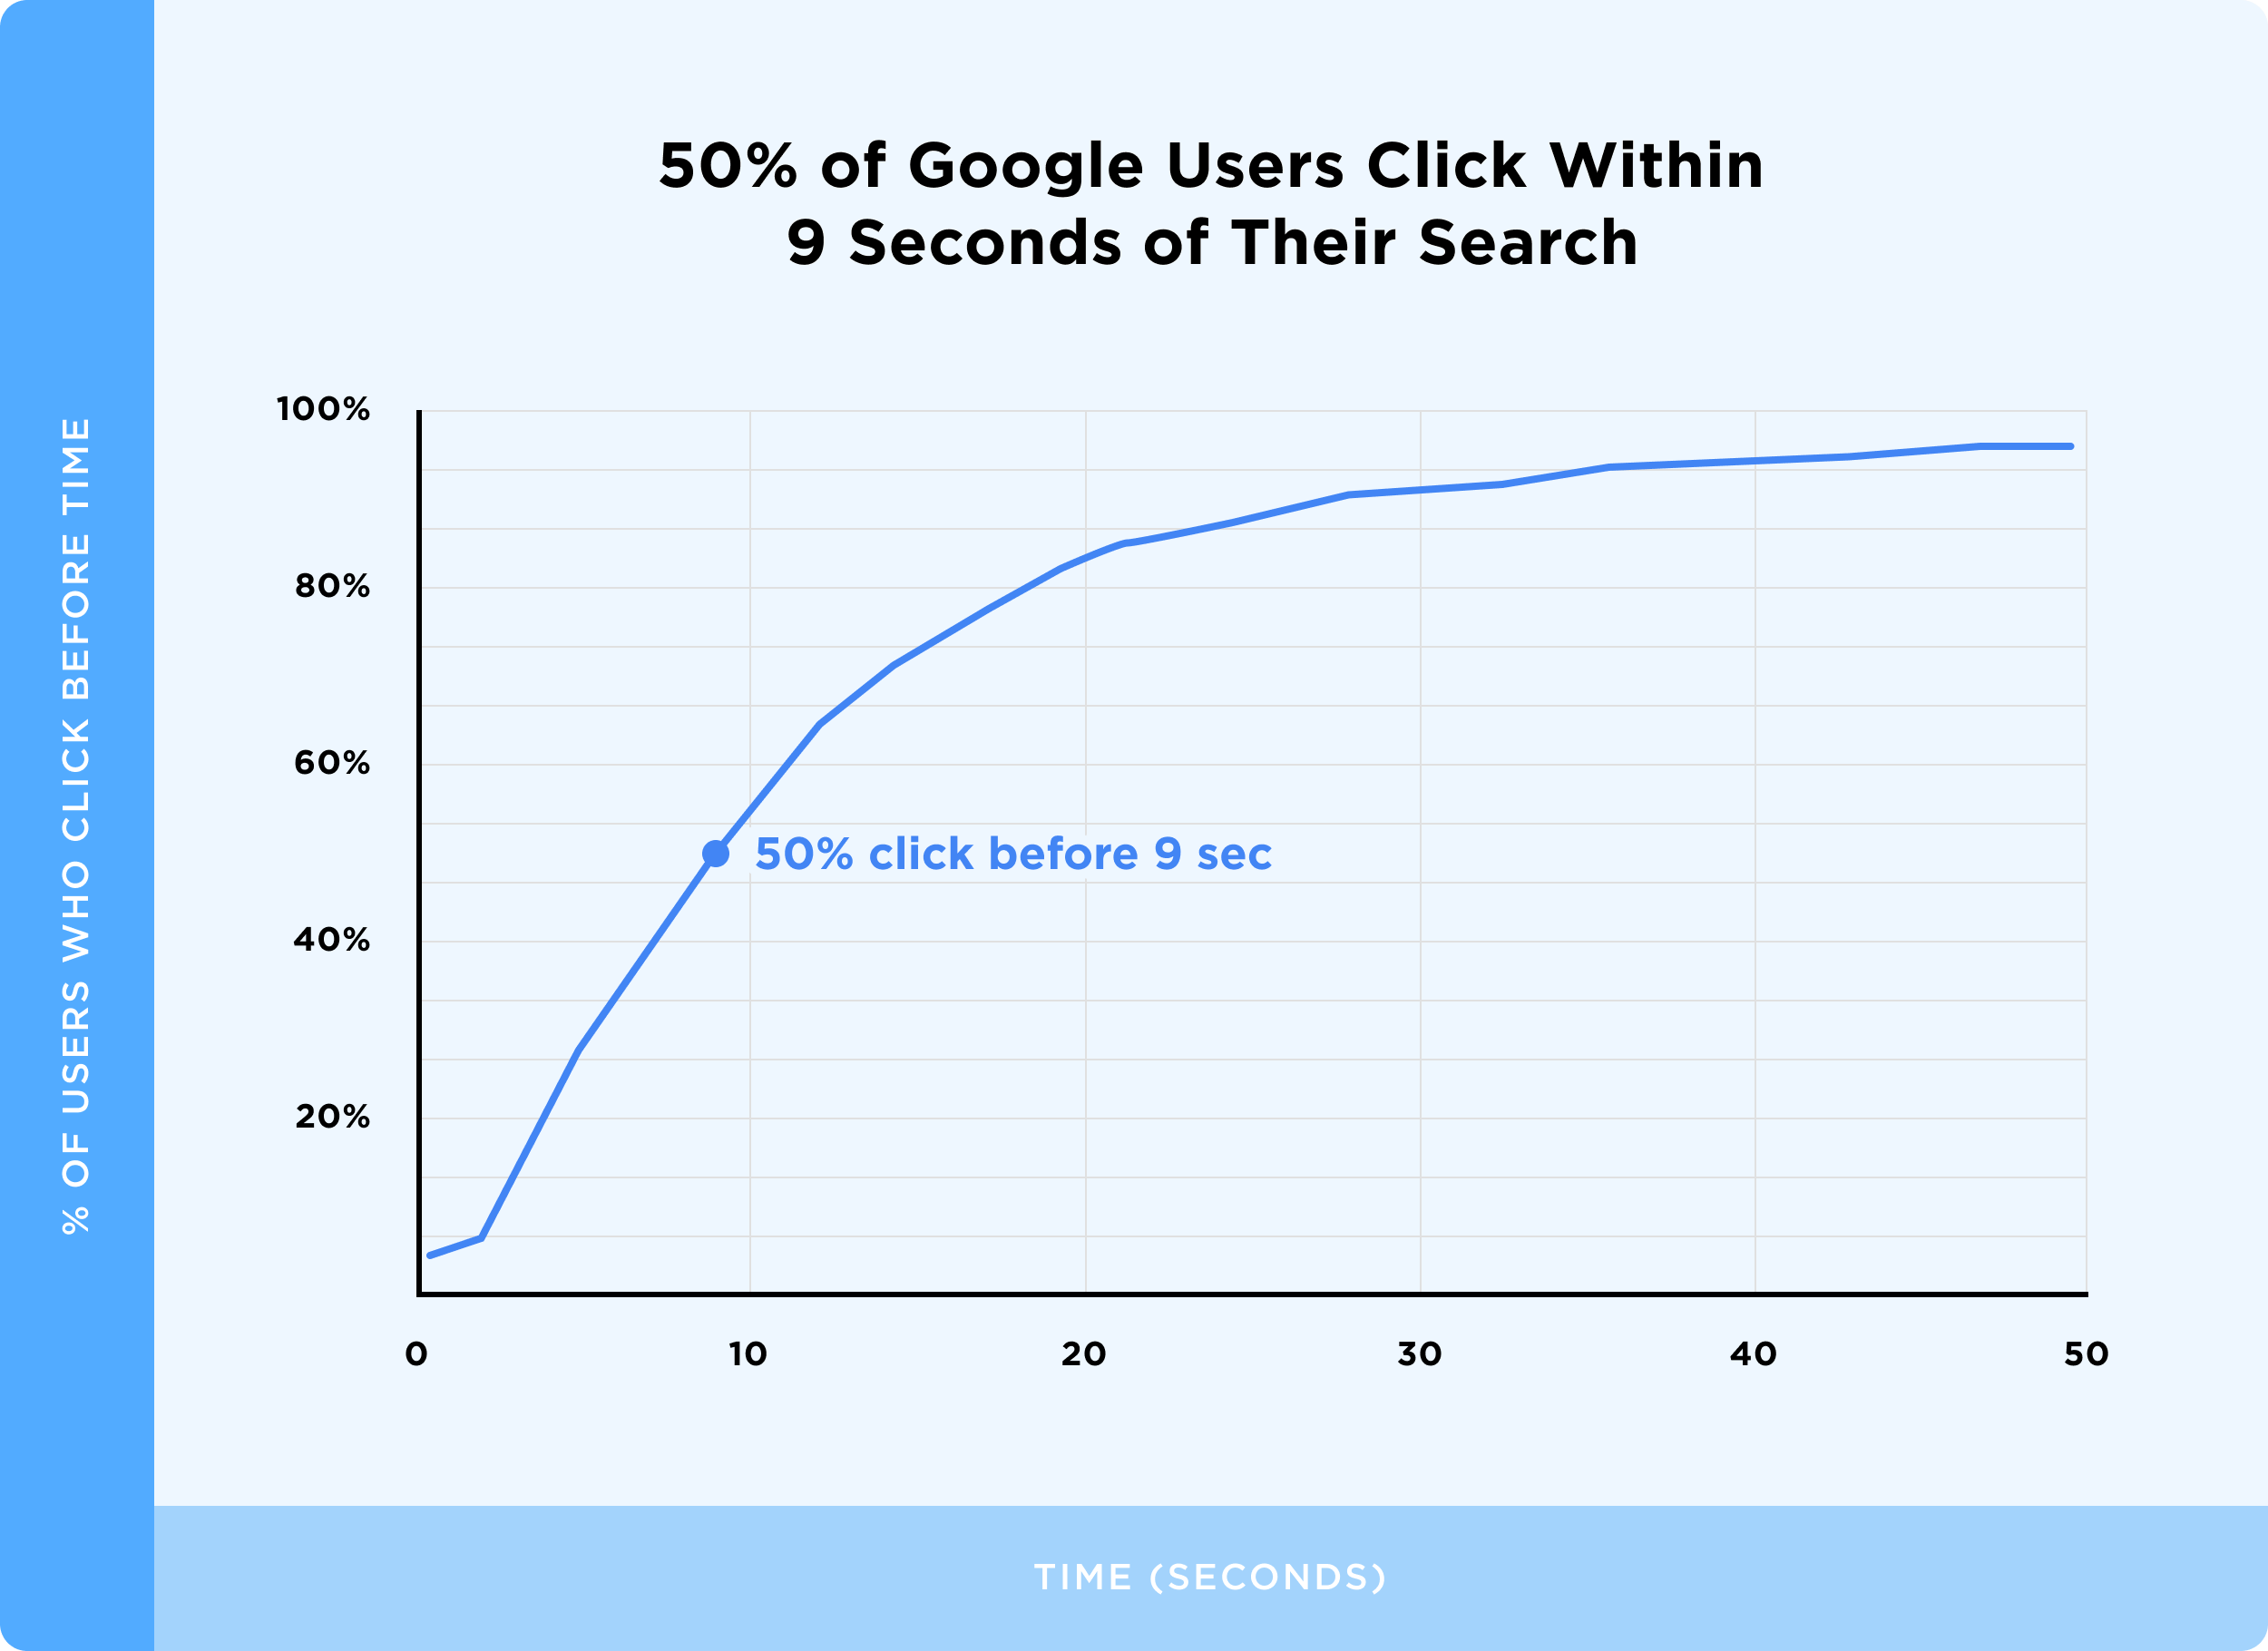 50% of Google Users Click Within 9 Seconds of Their Search